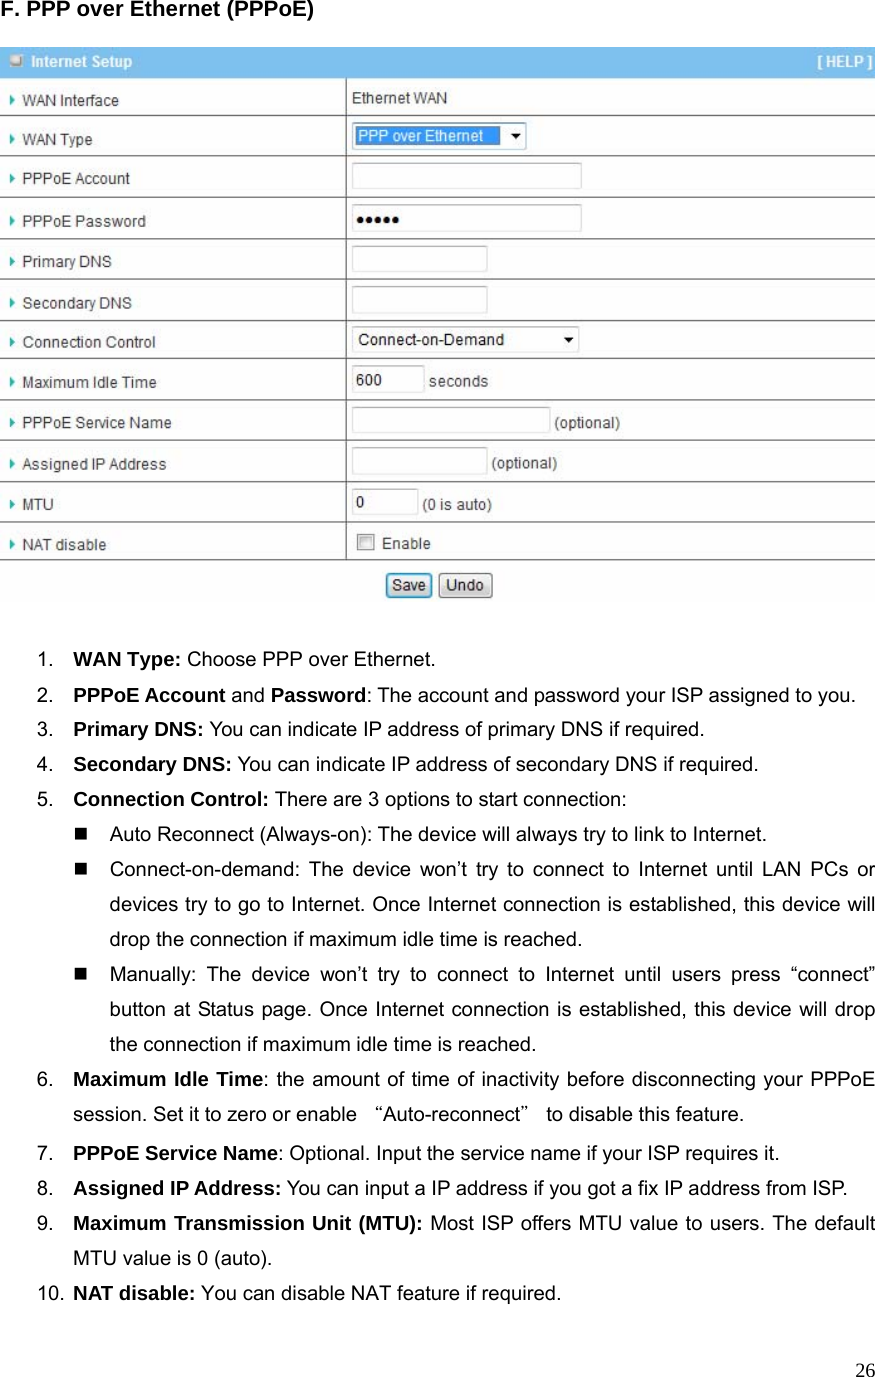  26F. PPP over Ethernet (PPPoE)     1.  WAN Type: Choose PPP over Ethernet. 2.  PPPoE Account and Password: The account and password your ISP assigned to you.   3.  Primary DNS: You can indicate IP address of primary DNS if required. 4.  Secondary DNS: You can indicate IP address of secondary DNS if required. 5.  Connection Control: There are 3 options to start connection:     Auto Reconnect (Always-on): The device will always try to link to Internet.       Connect-on-demand: The device won’t try to connect to Internet until LAN PCs or devices try to go to Internet. Once Internet connection is established, this device will drop the connection if maximum idle time is reached.   Manually: The device won’t try to connect to Internet until users press “connect” button at Status page. Once Internet connection is established, this device will drop the connection if maximum idle time is reached. 6.  Maximum Idle Time: the amount of time of inactivity before disconnecting your PPPoE session. Set it to zero or enable “Auto-reconnect＂ to disable this feature.   7.  PPPoE Service Name: Optional. Input the service name if your ISP requires it. 8.  Assigned IP Address: You can input a IP address if you got a fix IP address from ISP. 9.  Maximum Transmission Unit (MTU): Most ISP offers MTU value to users. The default MTU value is 0 (auto).   10.  NAT disable: You can disable NAT feature if required. 